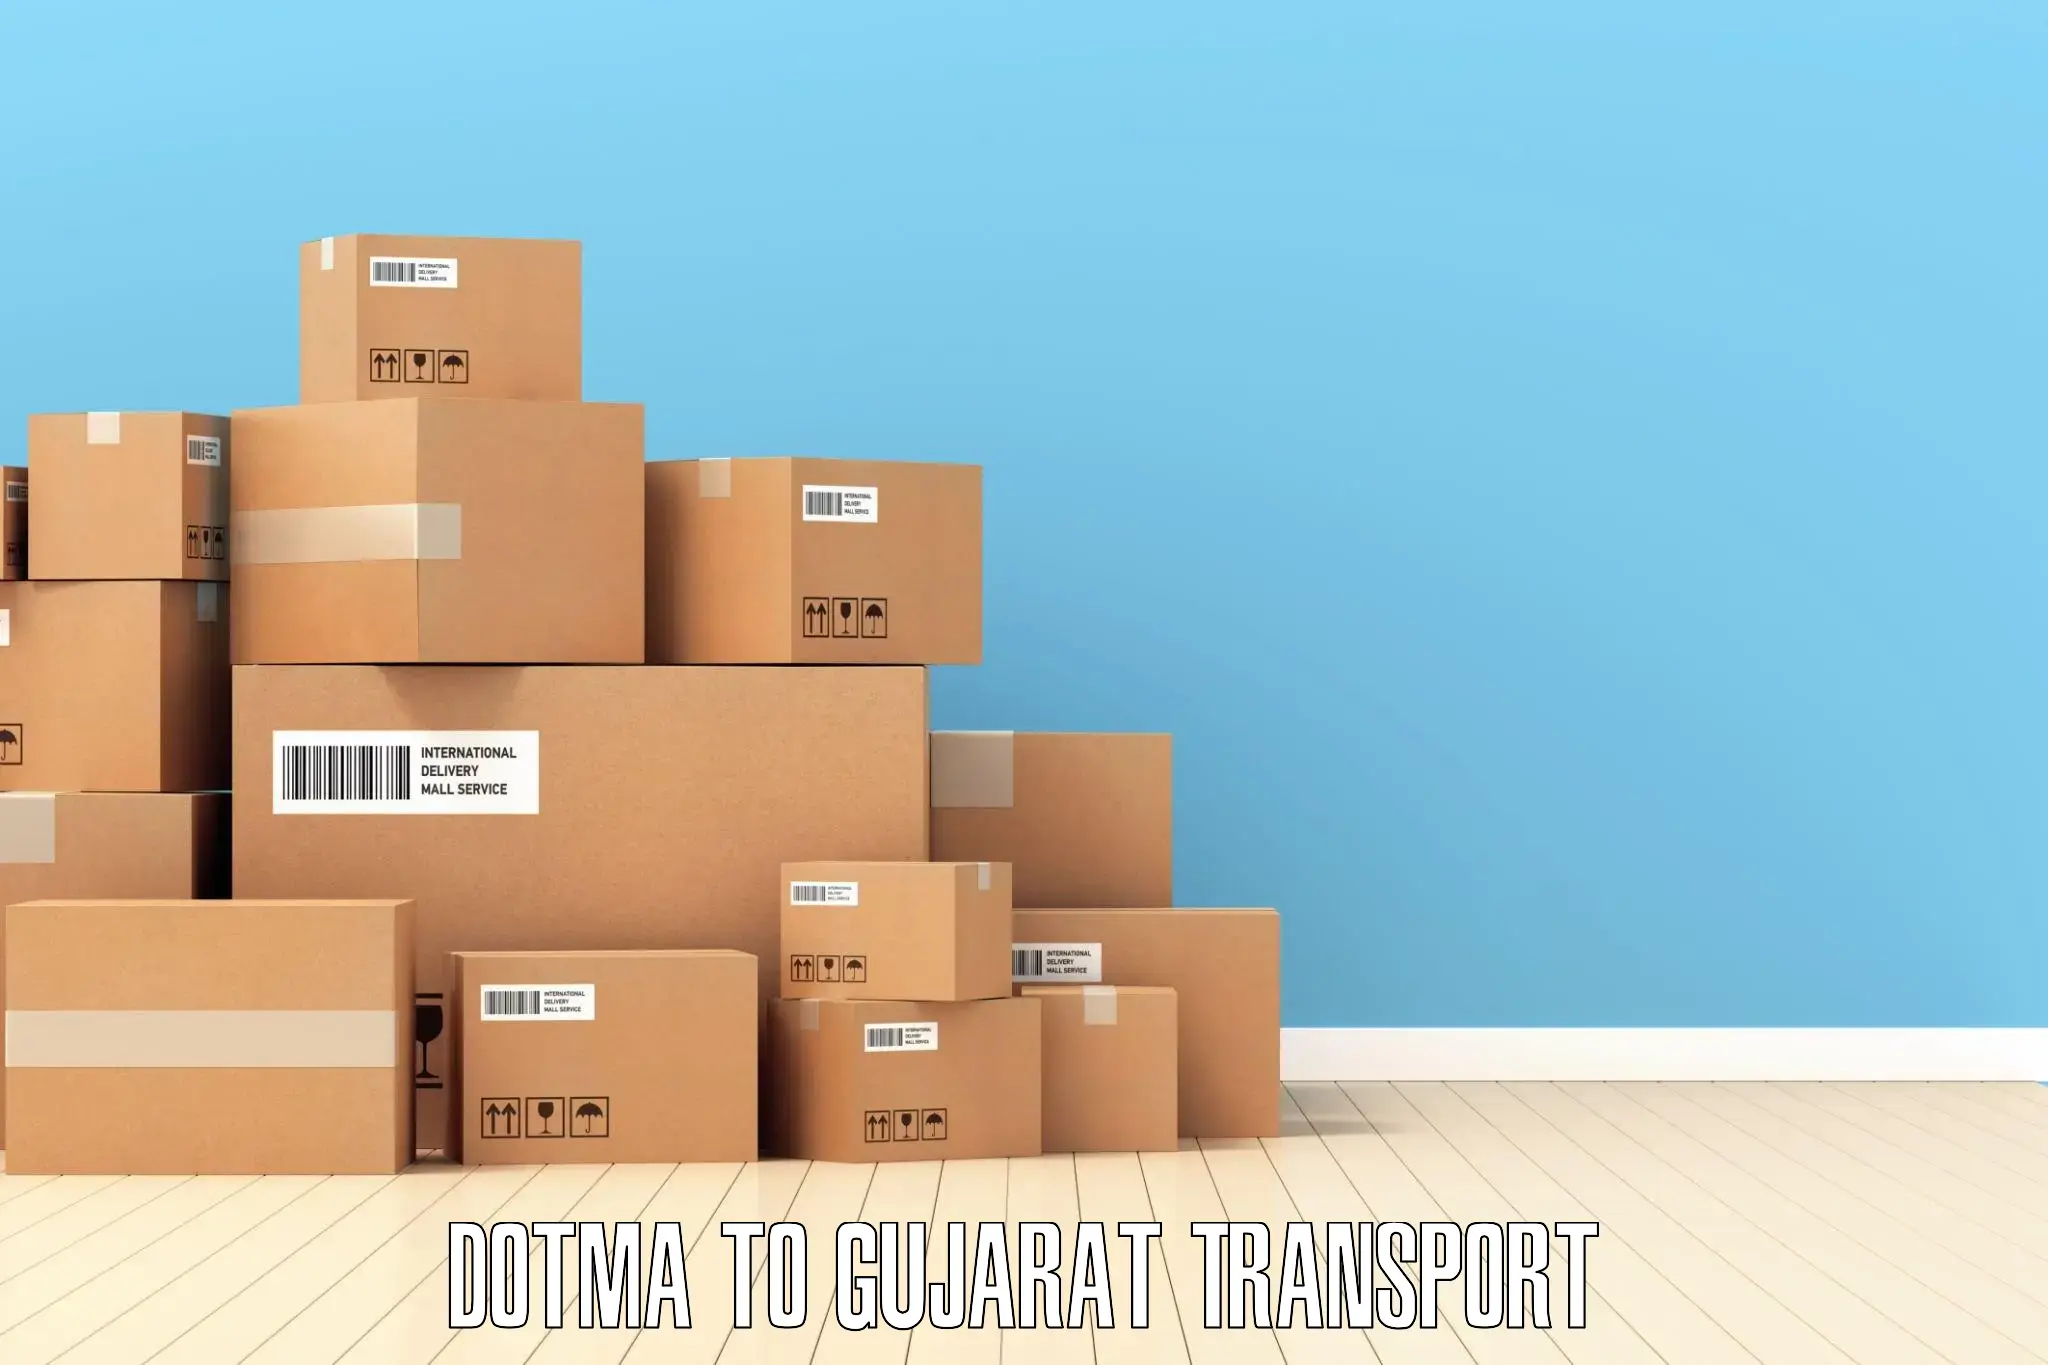 Container transportation services Dotma to Botad